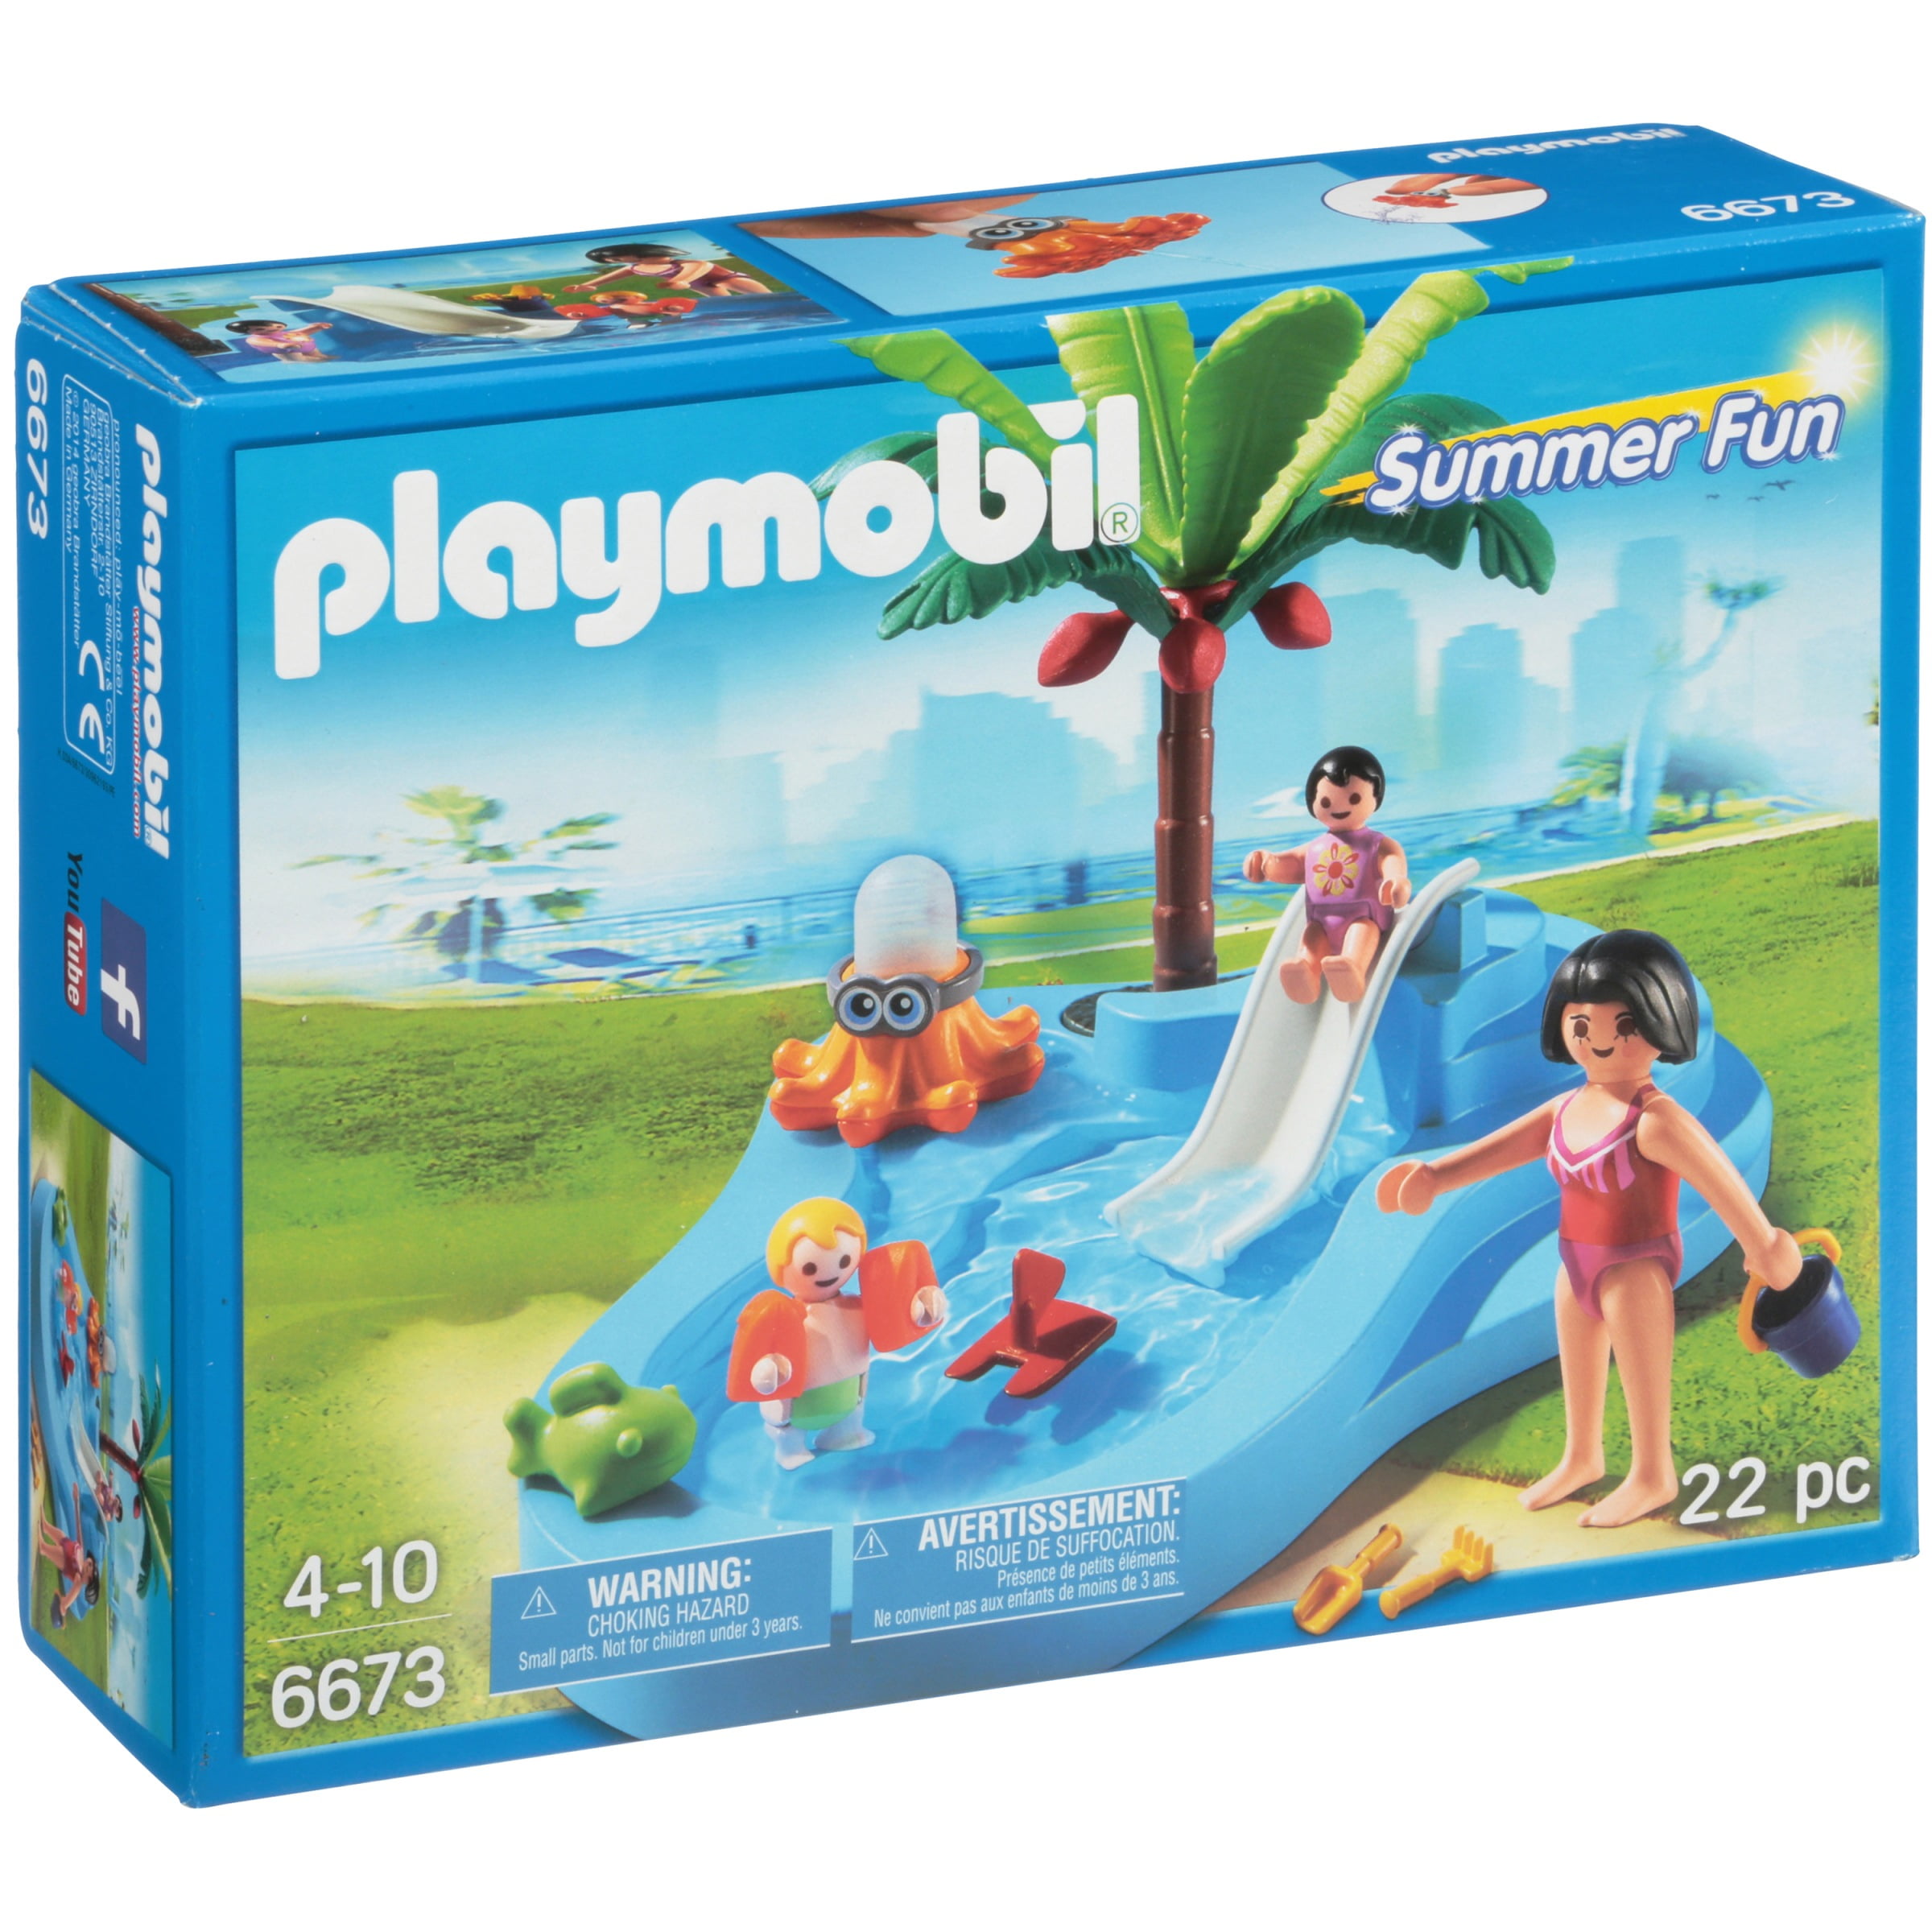 Playmobil BABY/TODDLER SHALLOW POOL COCONUT PALM TREE WOMAN SLIDE 